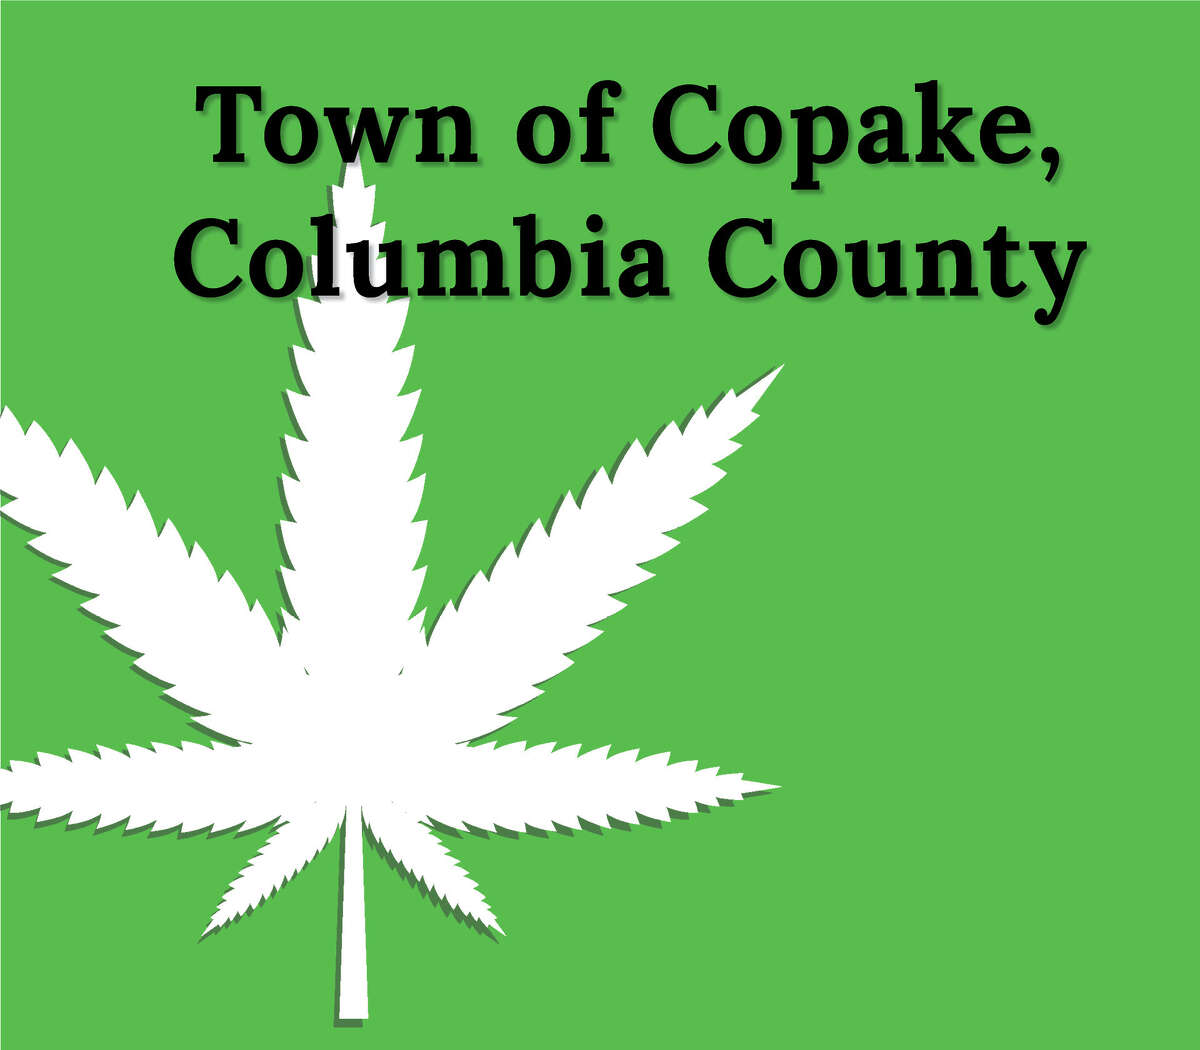 On Nov. 11, the Town of Copake town board voted 3 to 1 to allow marijuana dispensaries. There was one abstention. Town Supervisor Jeanne Mettler said in an email that those favoring dispensaries cited the tax revenue and economic benefit to the town.  A public forum was held prior to the meeting and all residents who spoke favored the opening of dispensaries. The Copake Economic Development Advisory Committee also voiced its support.  The town board will vote on the issue of on-site consumption in December.